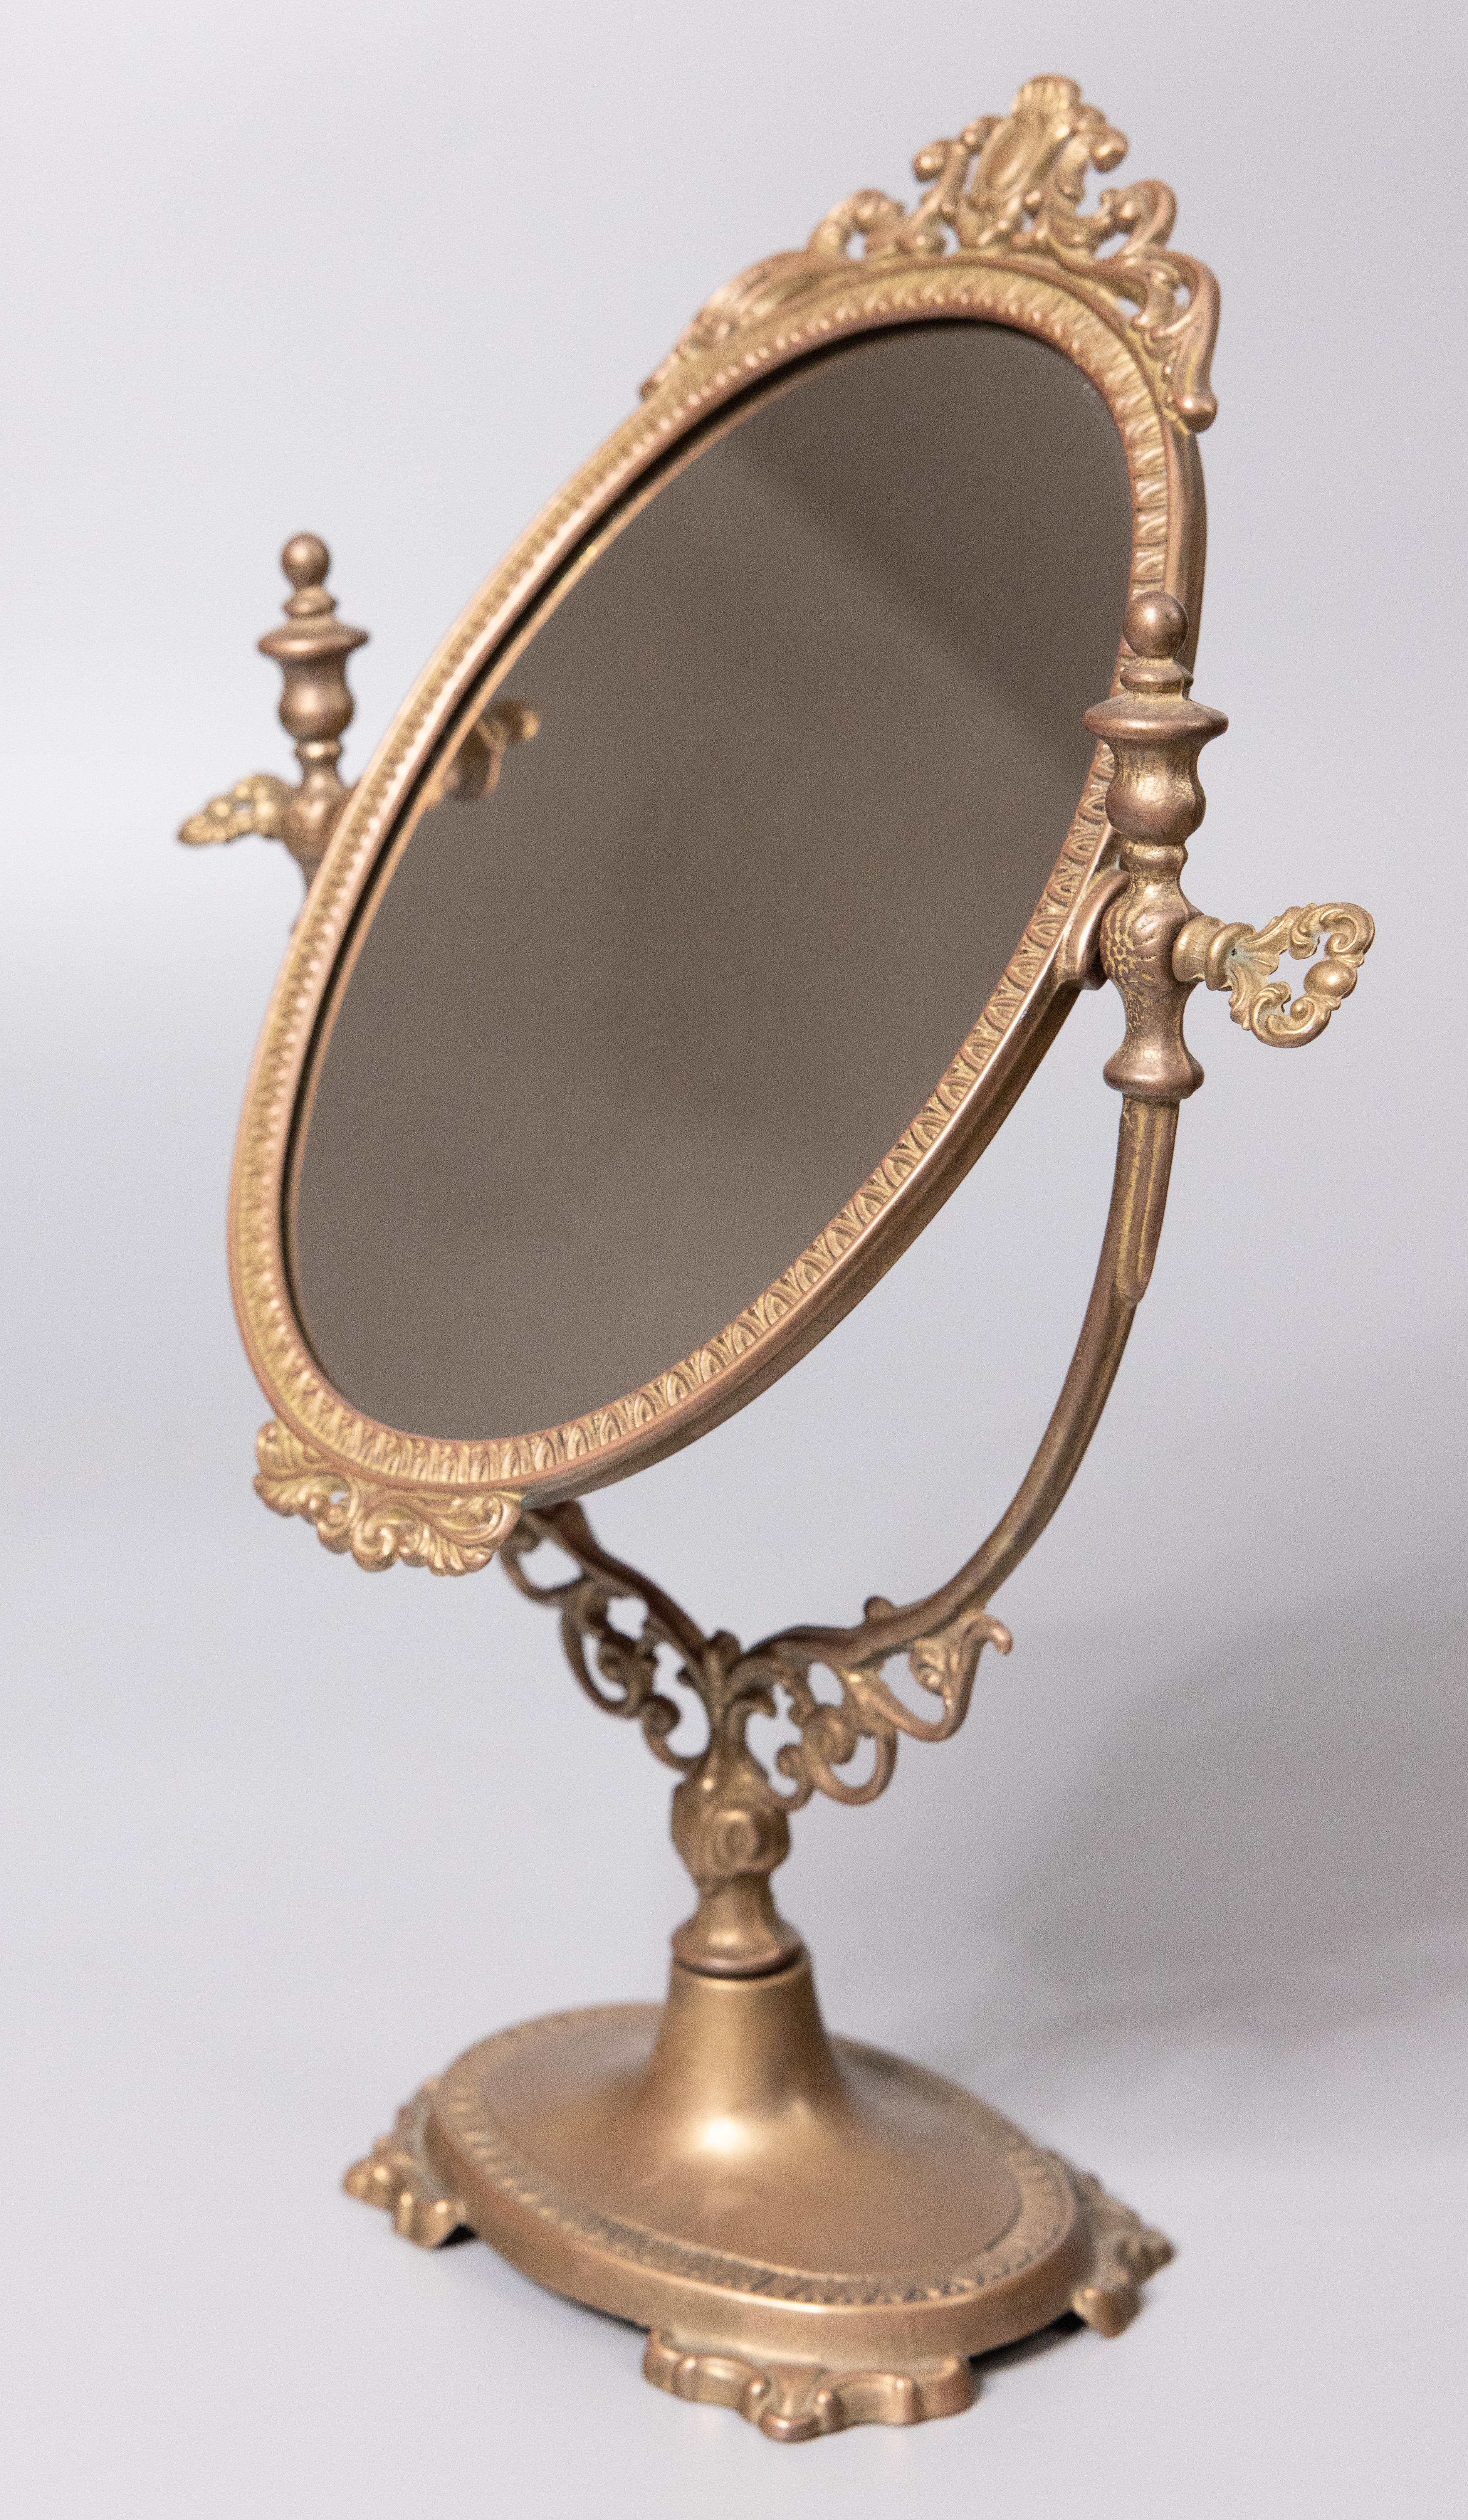 A gorgeous vintage Italian Rococo style brass dressing tabletop swivel mirror with ornate knobs to adjust the angle. 